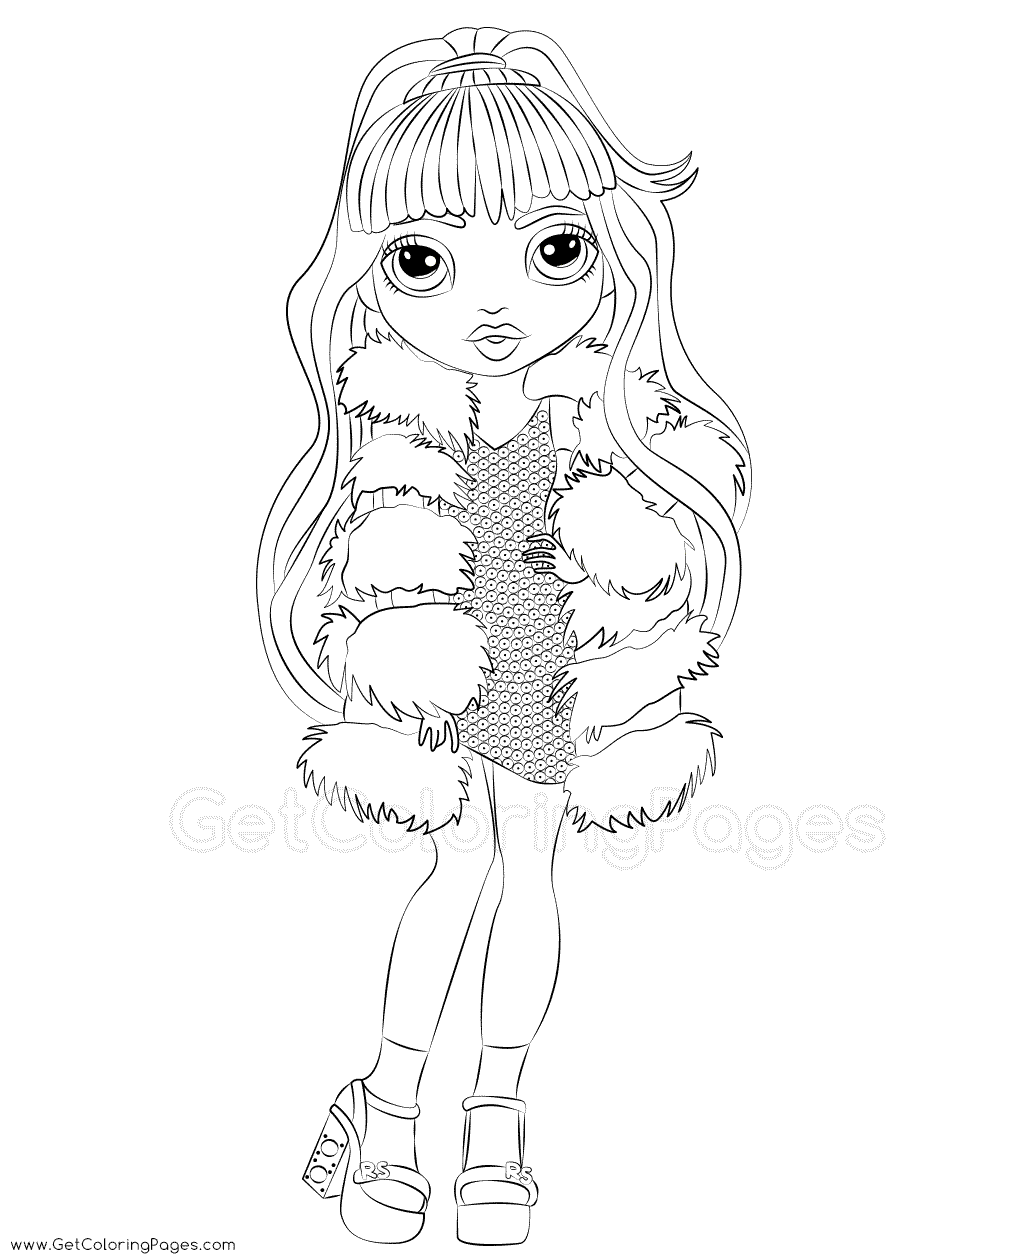 Rainbow High Violet Willow Coloring - Get Coloring Pages